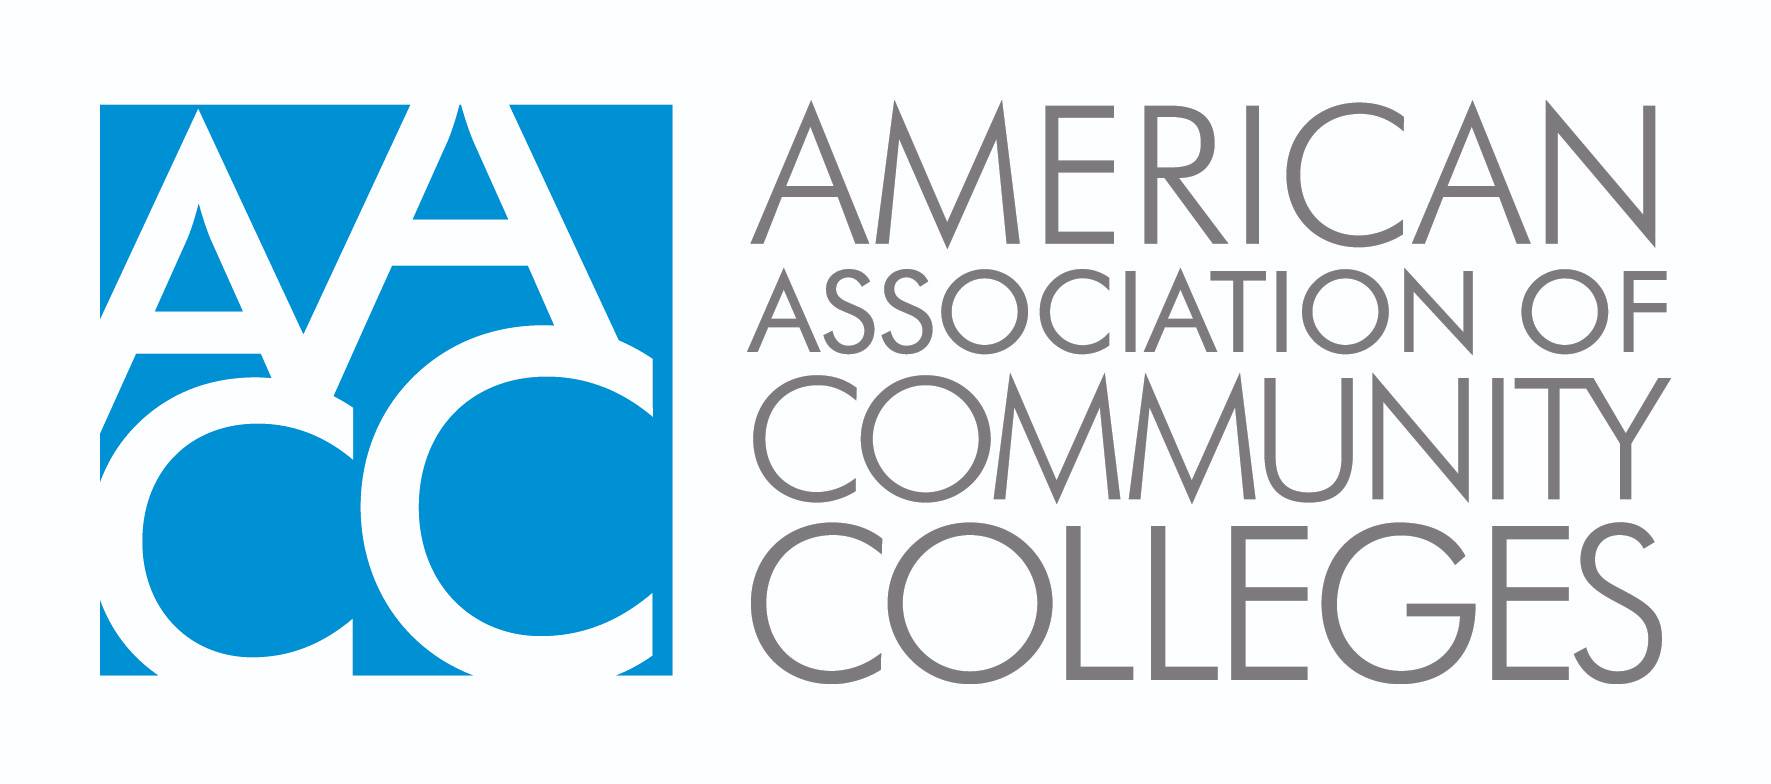 American Association of Community Colleges (AACC) logo